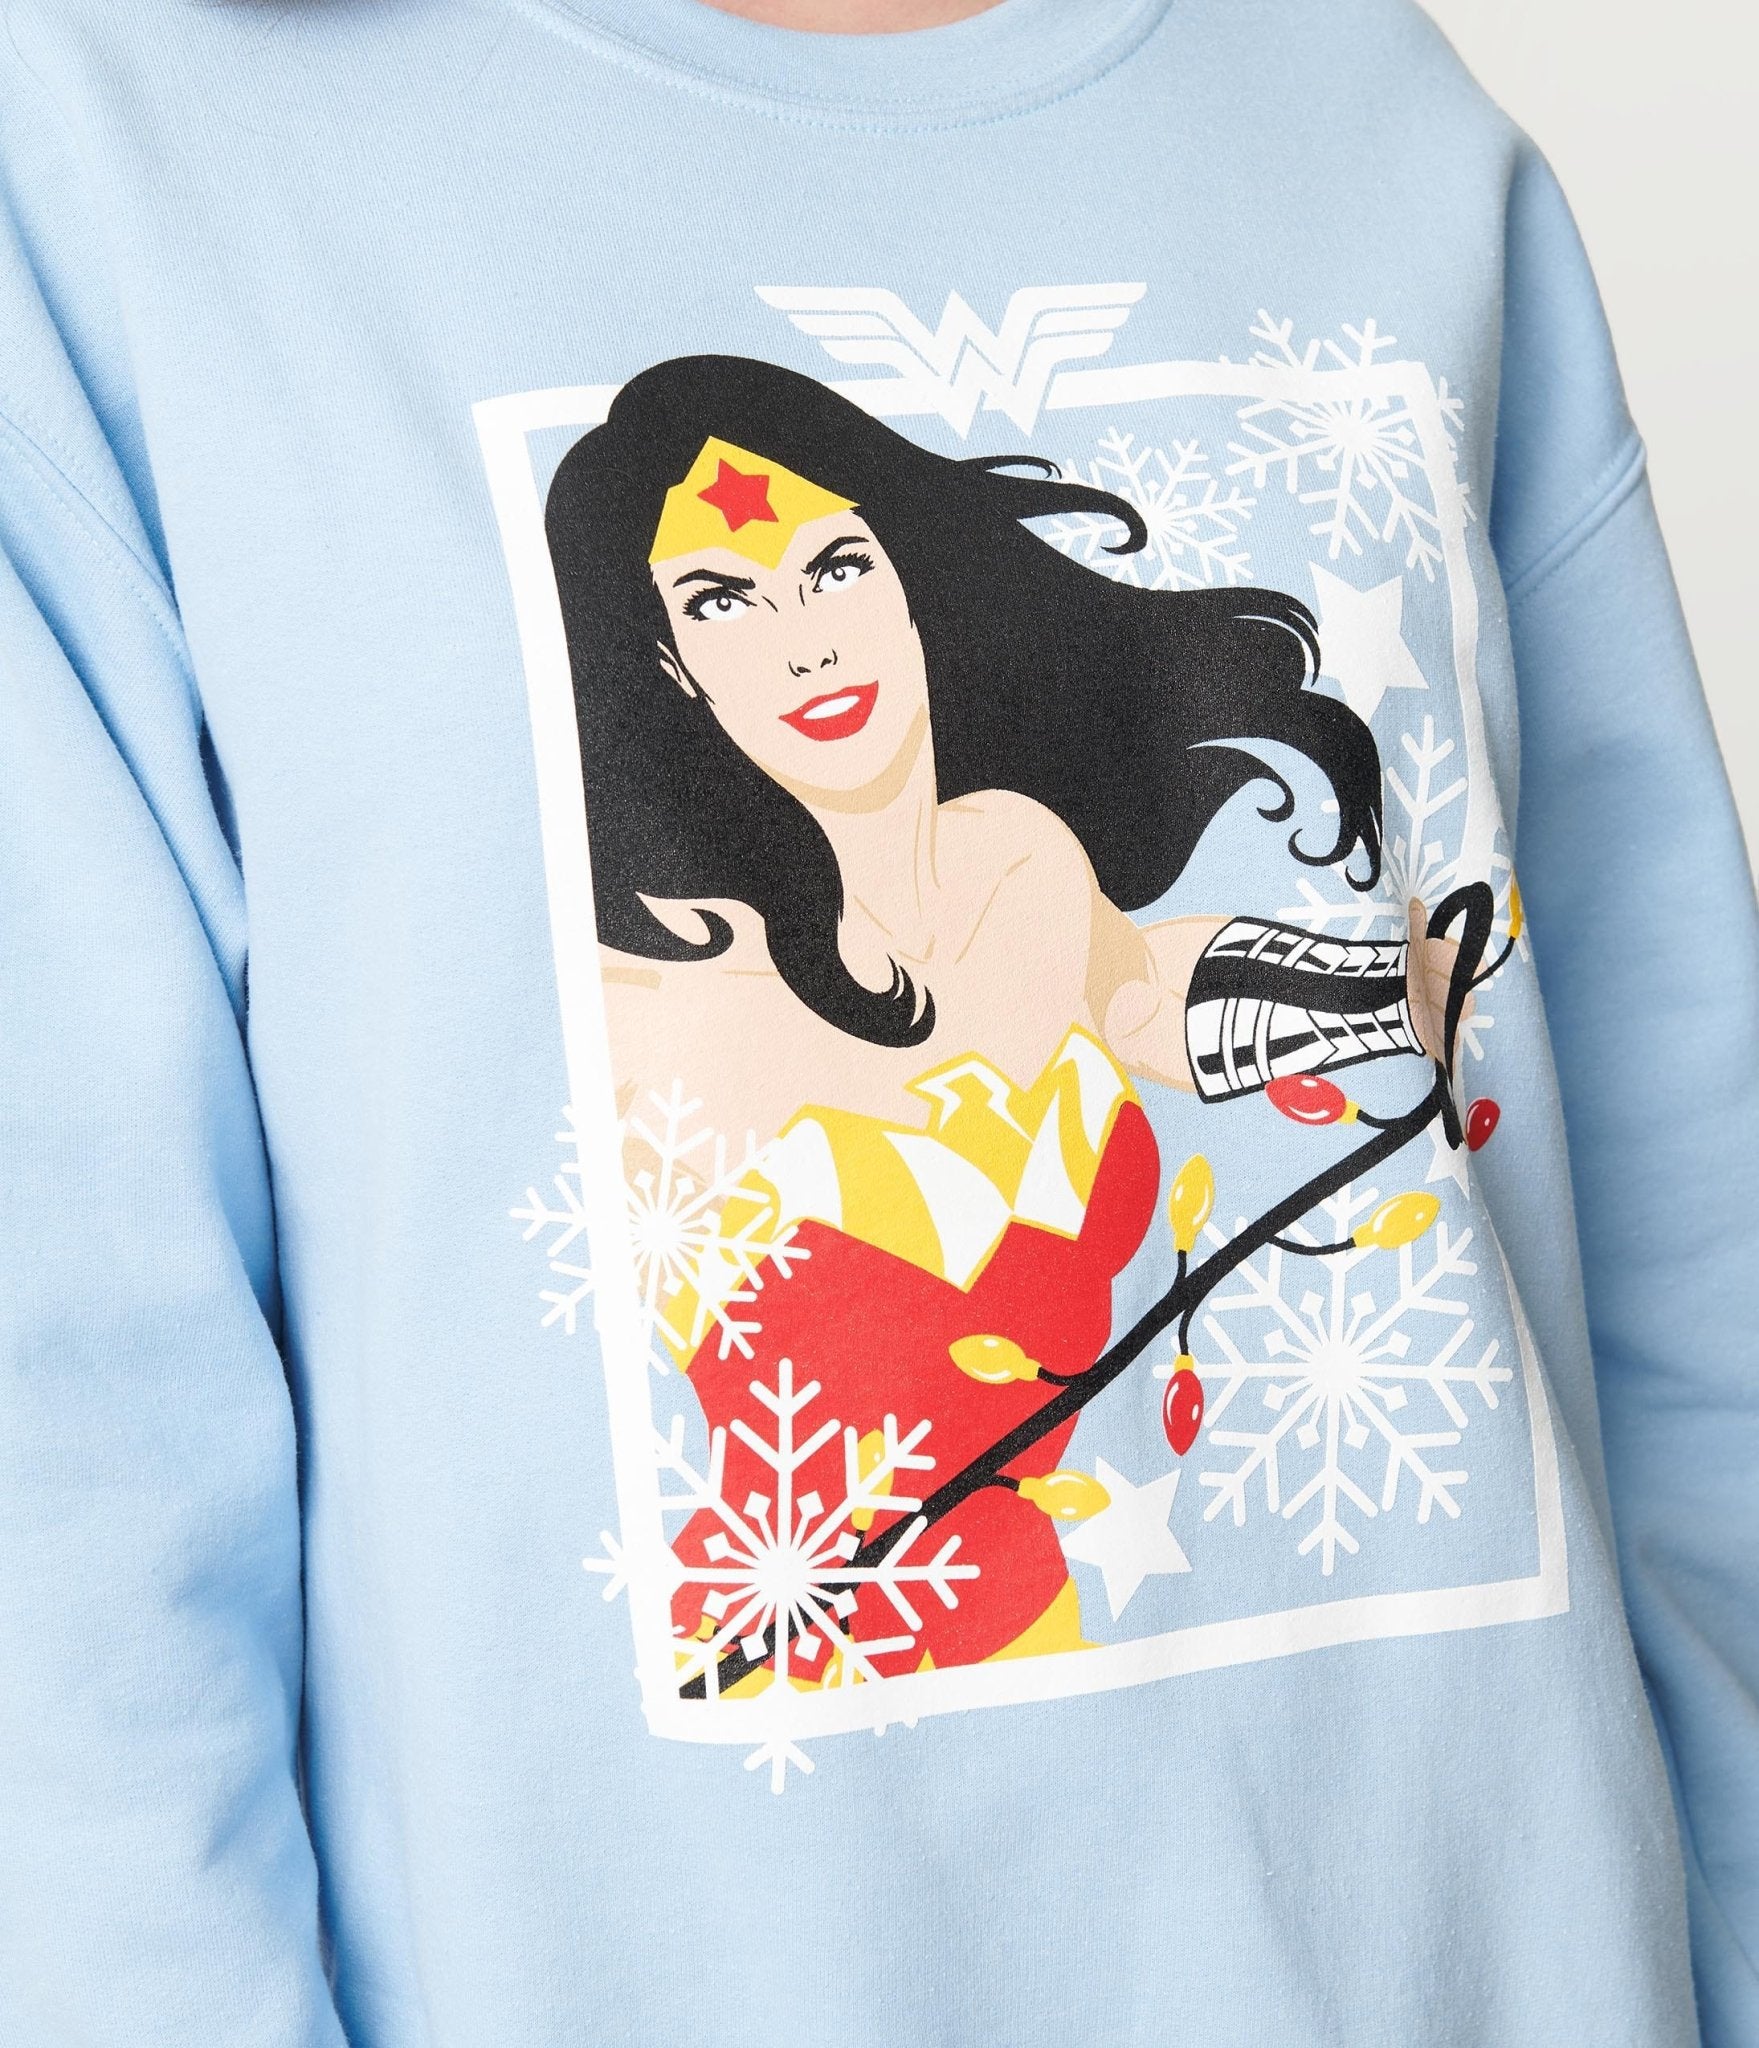 Womens Christmas Graphic Sweatshirts Holiday,womens clearance  sweatshirtes,clearance tank tops for women,most purchased items on,stuff  under 5 dollars,clearance wedding sweatshirt,cheap items under 1 at   Women's Clothing store